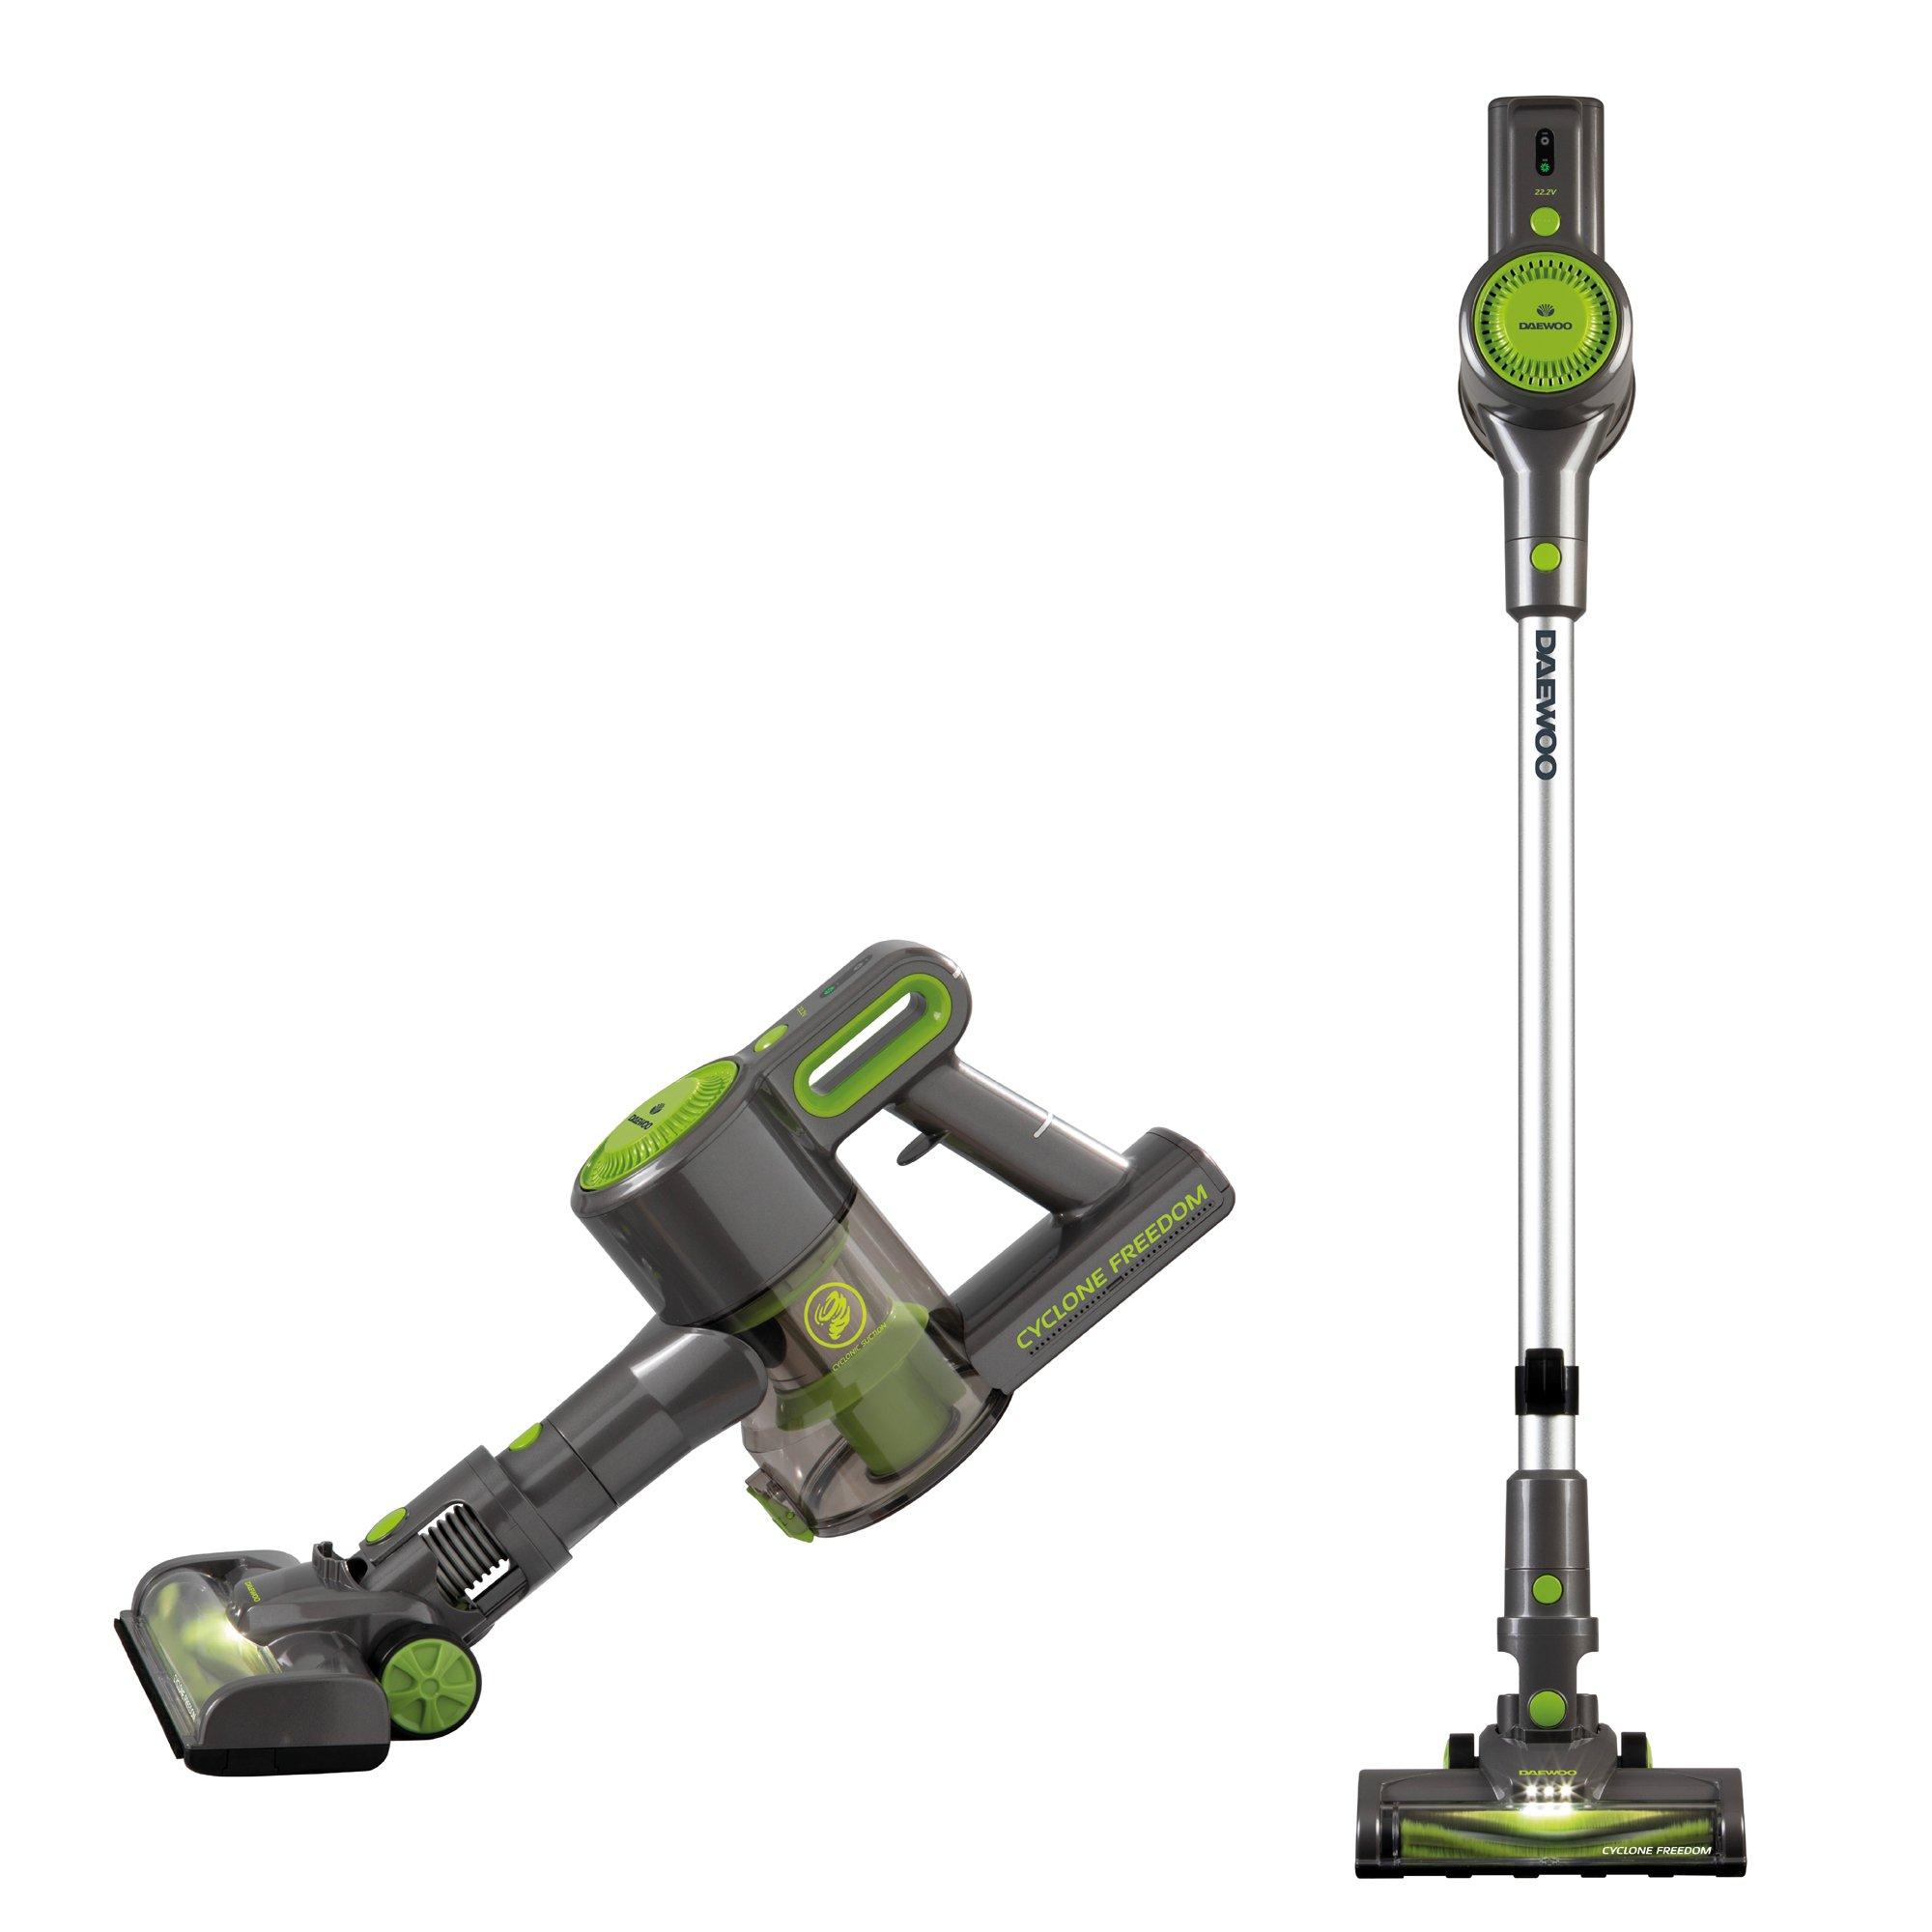 Cordless Stick Vacuum Haldheld Rechargeable Cyclone Bagless Silver Green